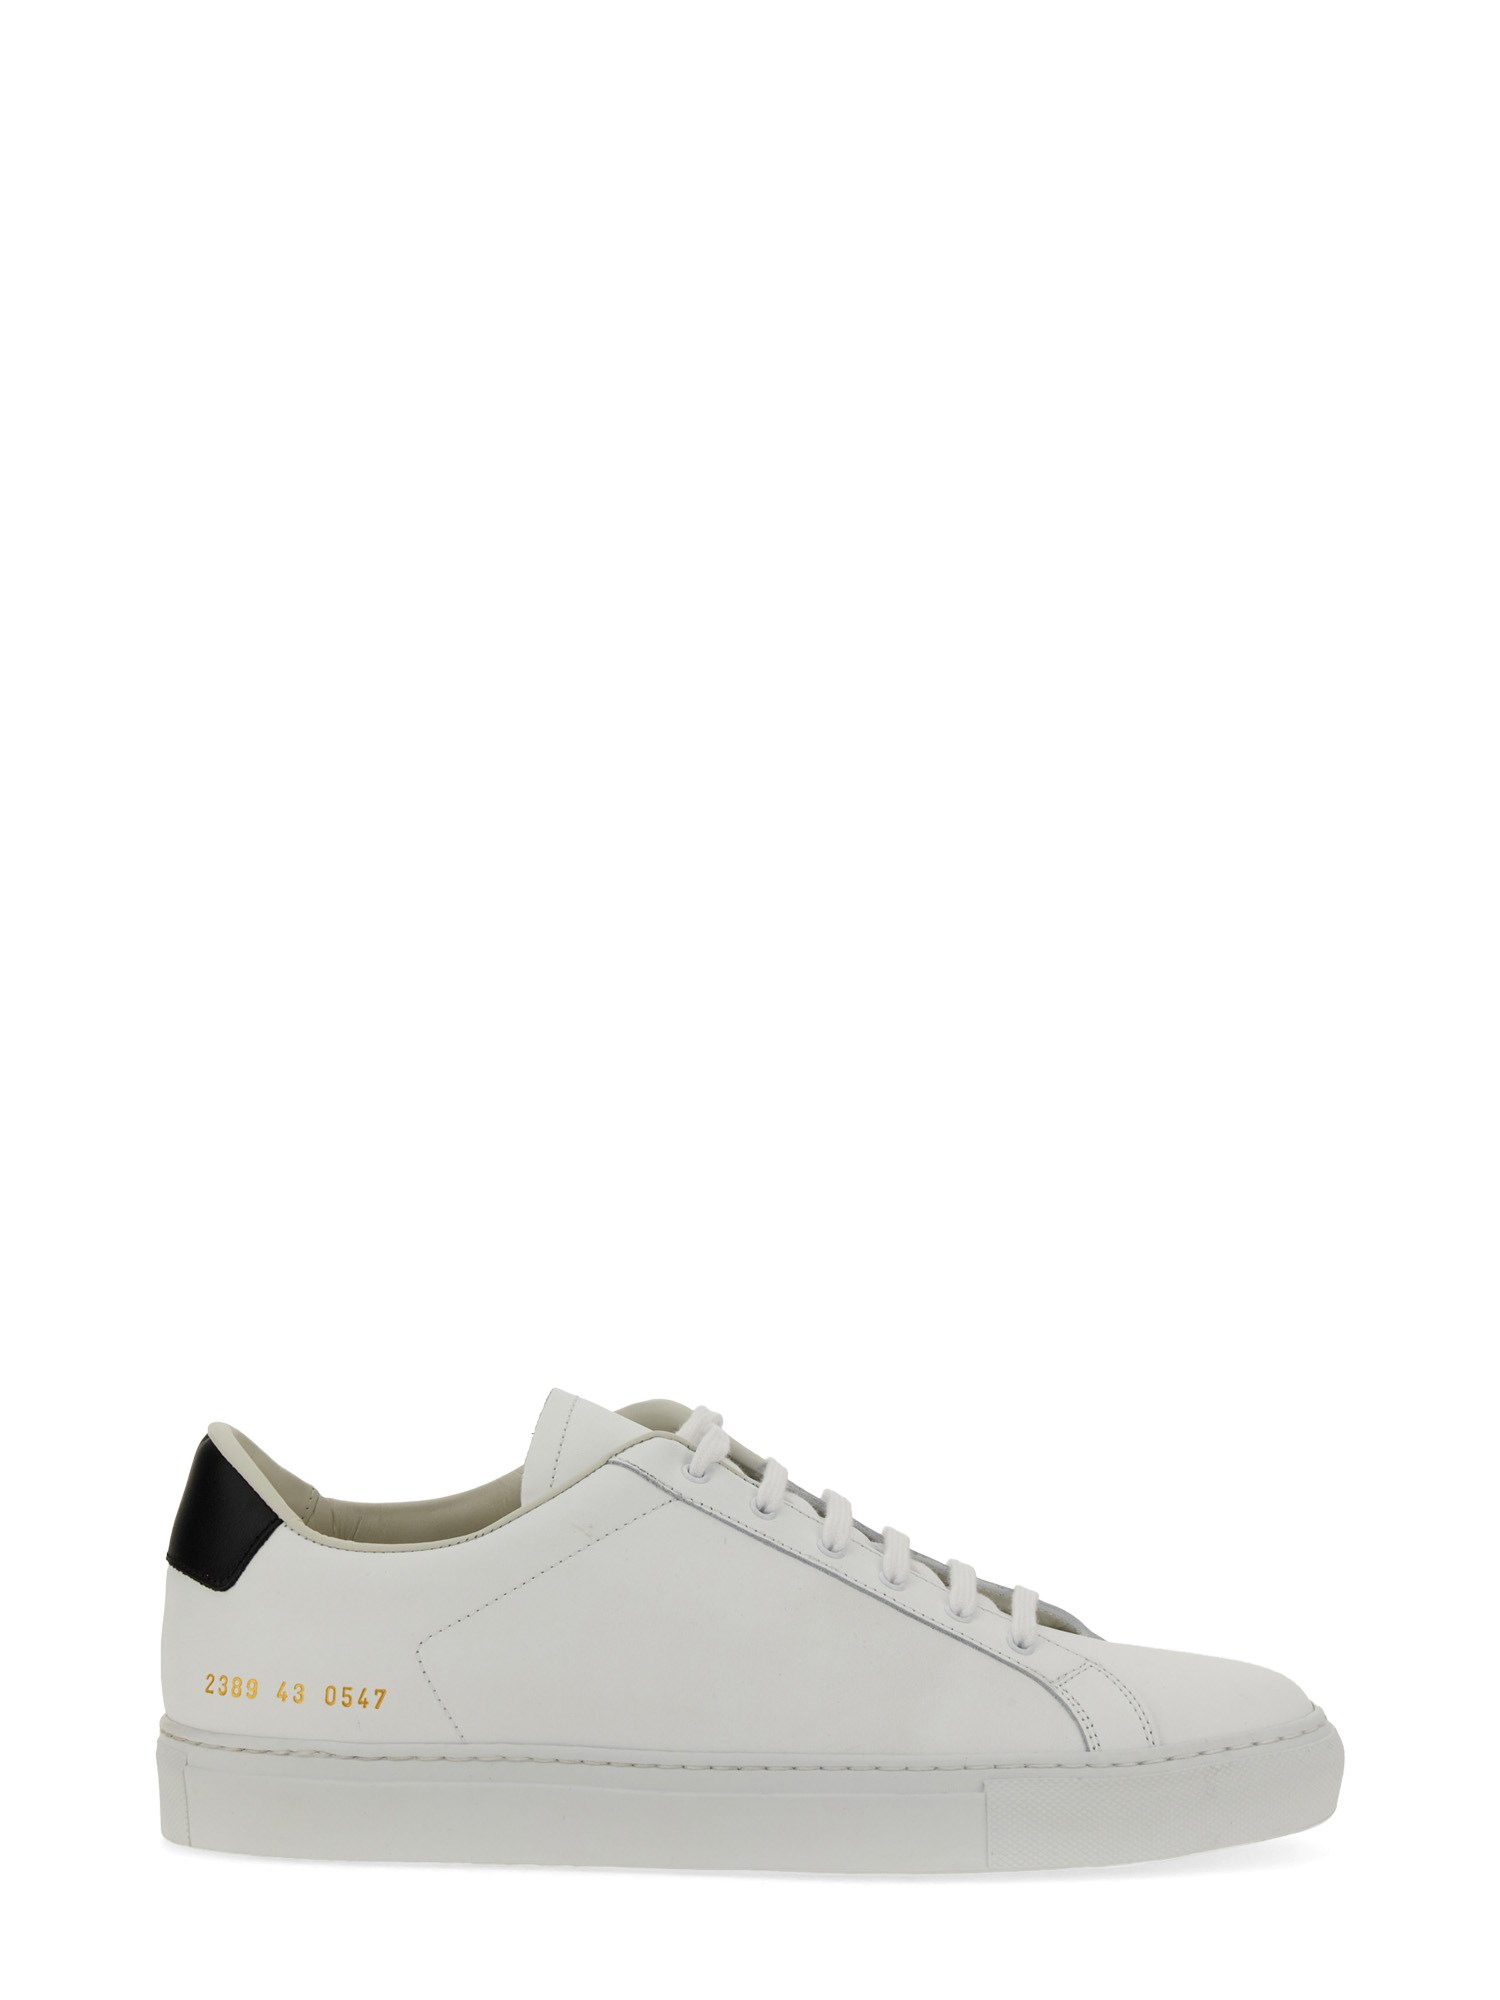 COMMON PROJECTS common projects retro classic sneaker